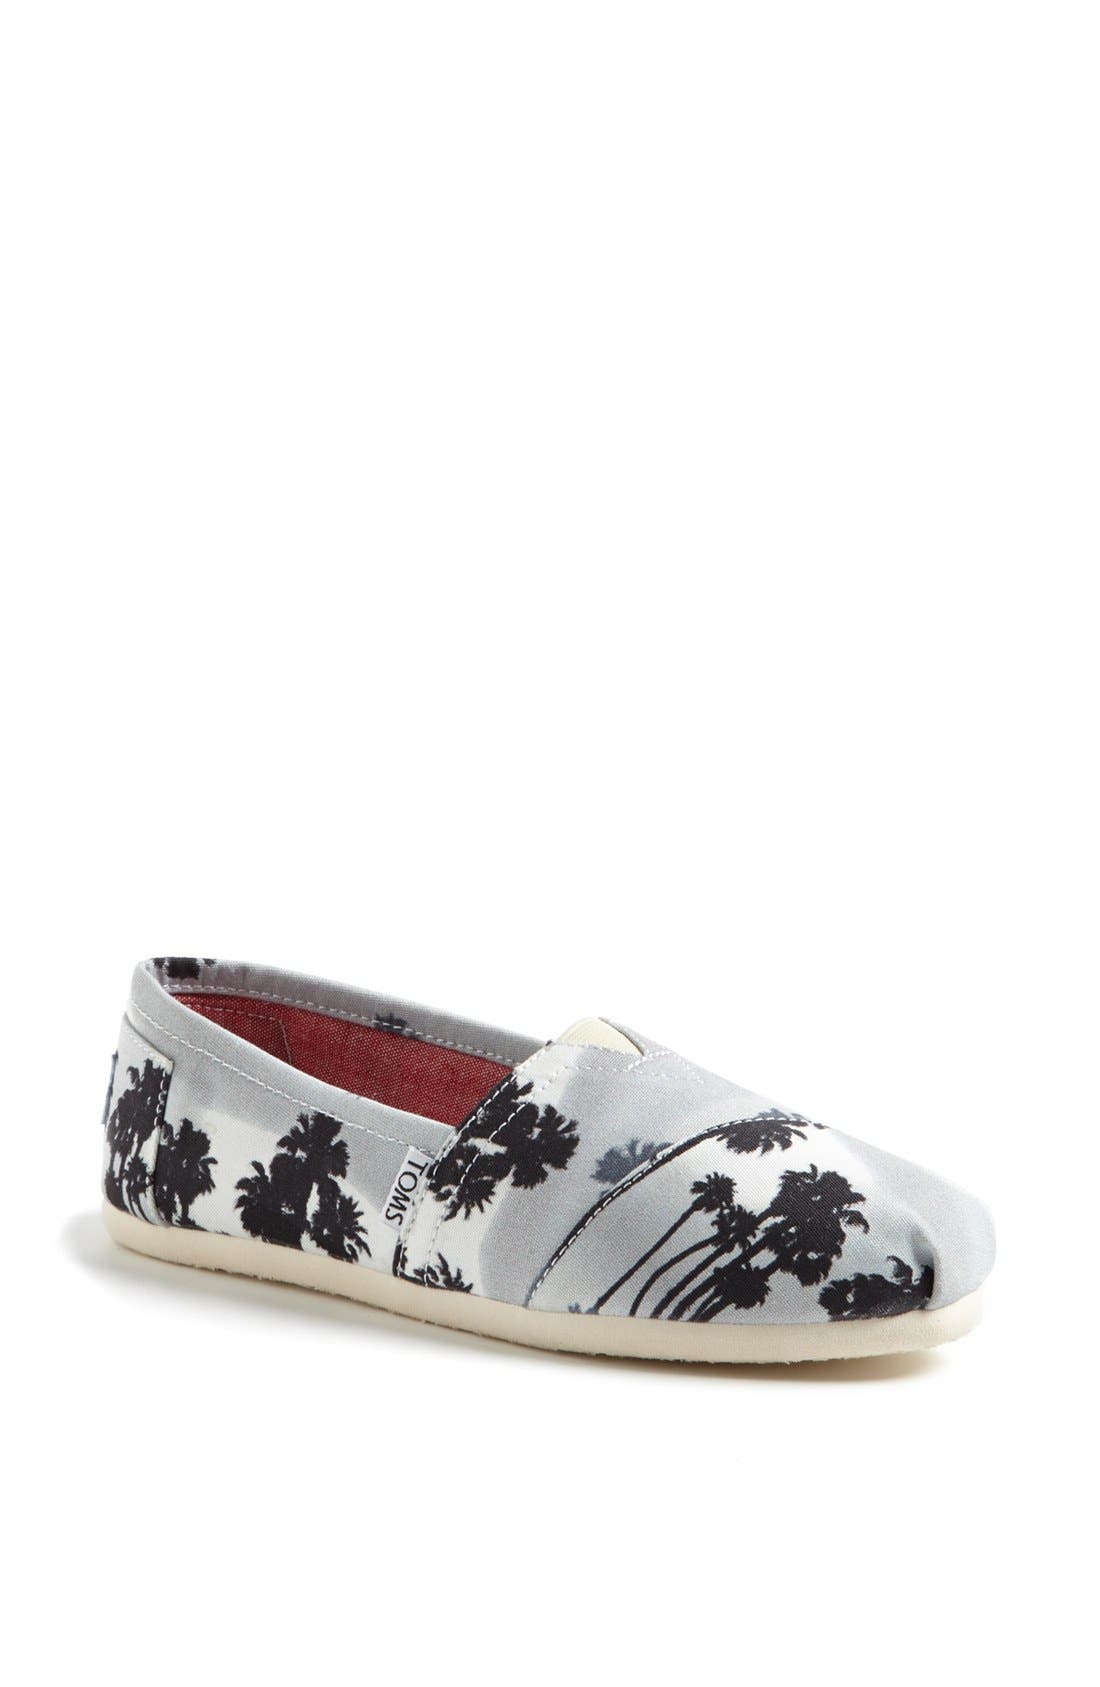 toms palm tree shoes